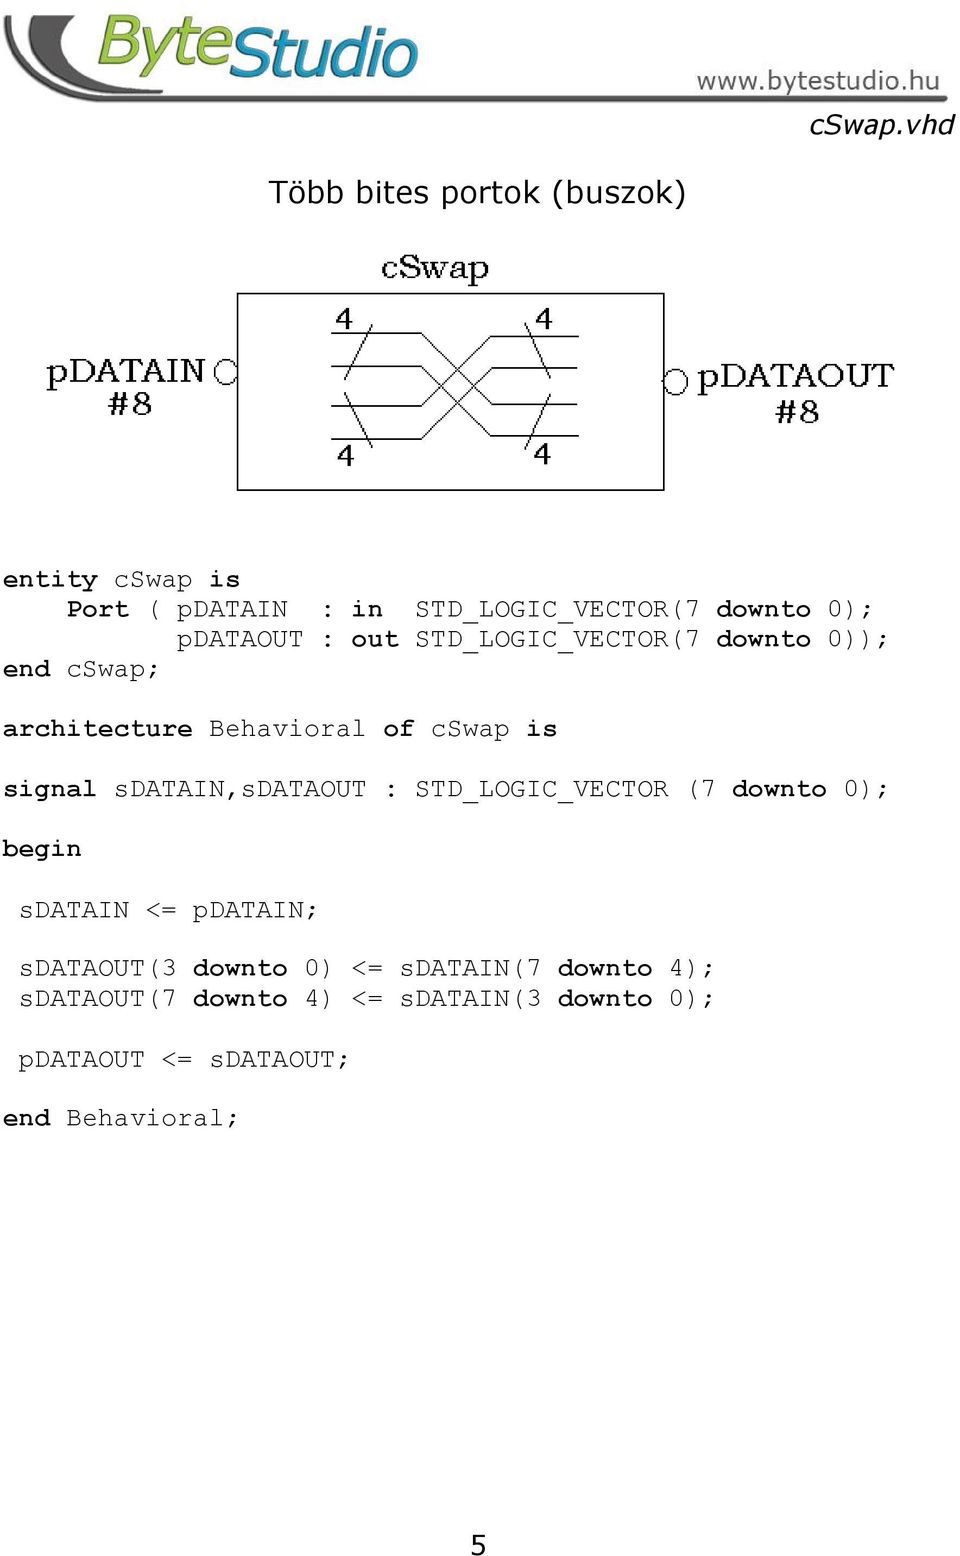 pdataout : out STD_LOGIC_VECTOR(7 downto 0)); end cswap; architecture Behavioral of cswap is signal